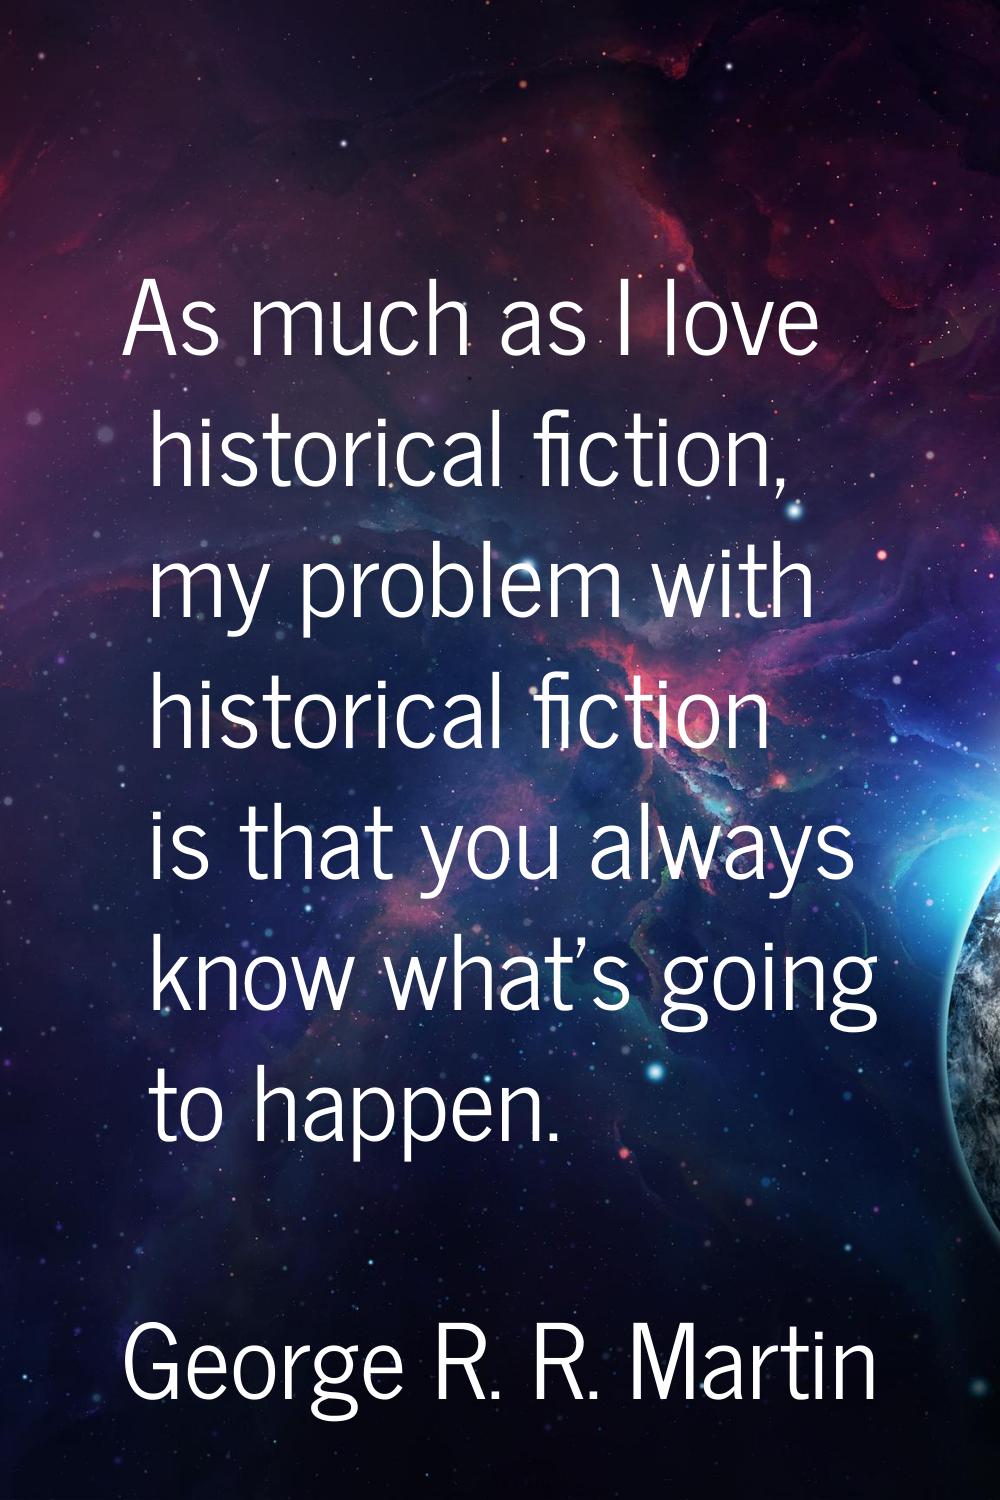 As much as I love historical fiction, my problem with historical fiction is that you always know wh